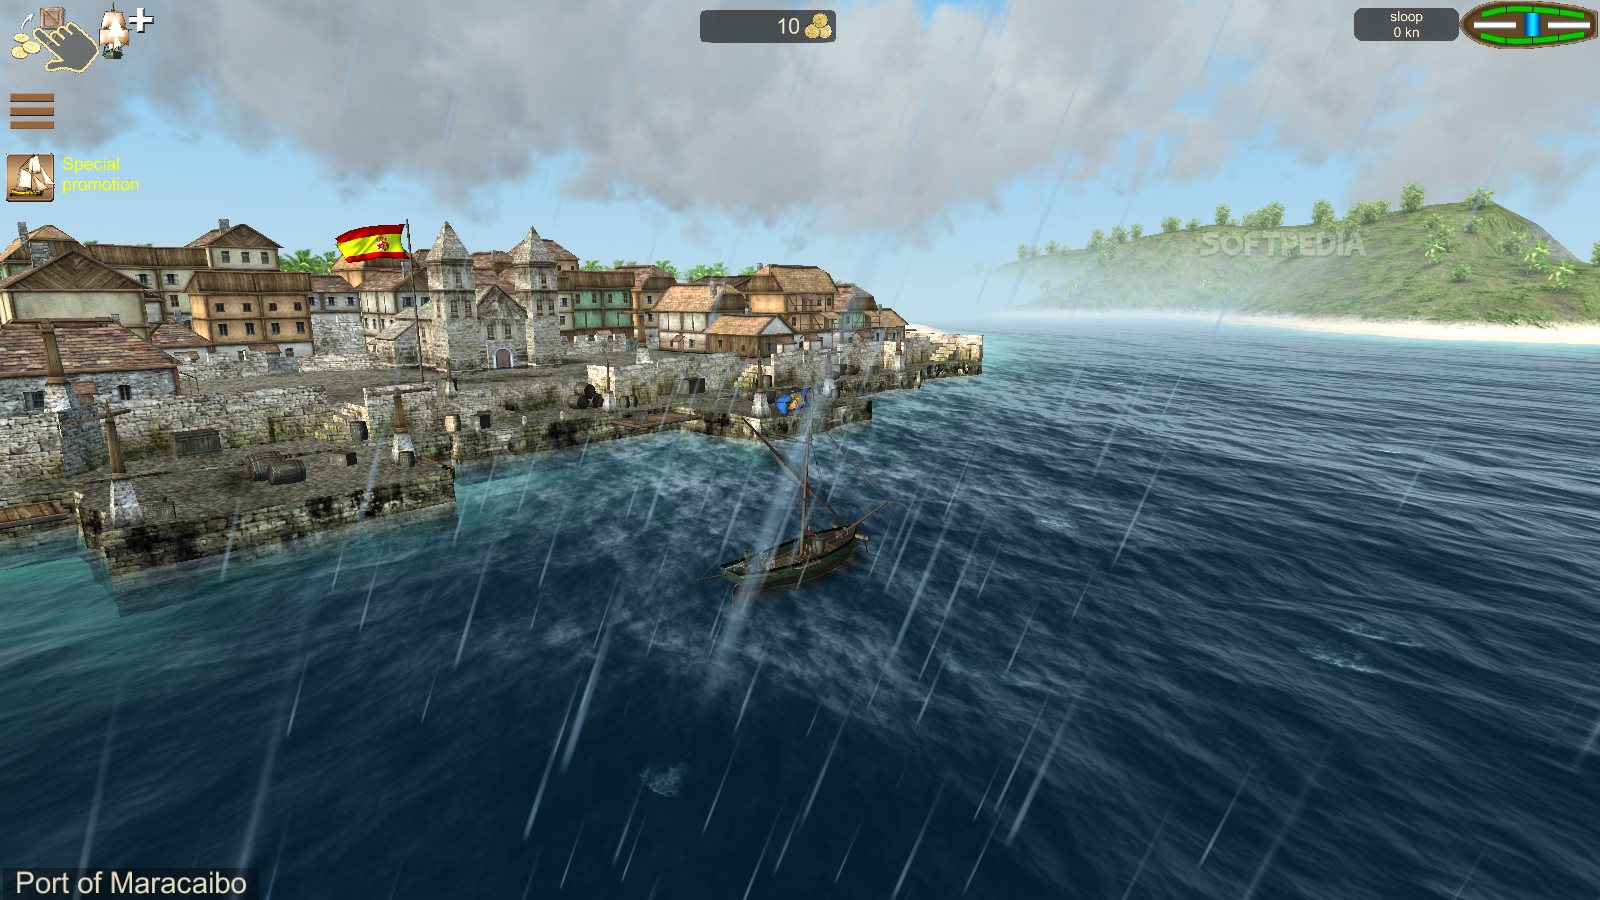 the pirate caribbean hunt attacking towns